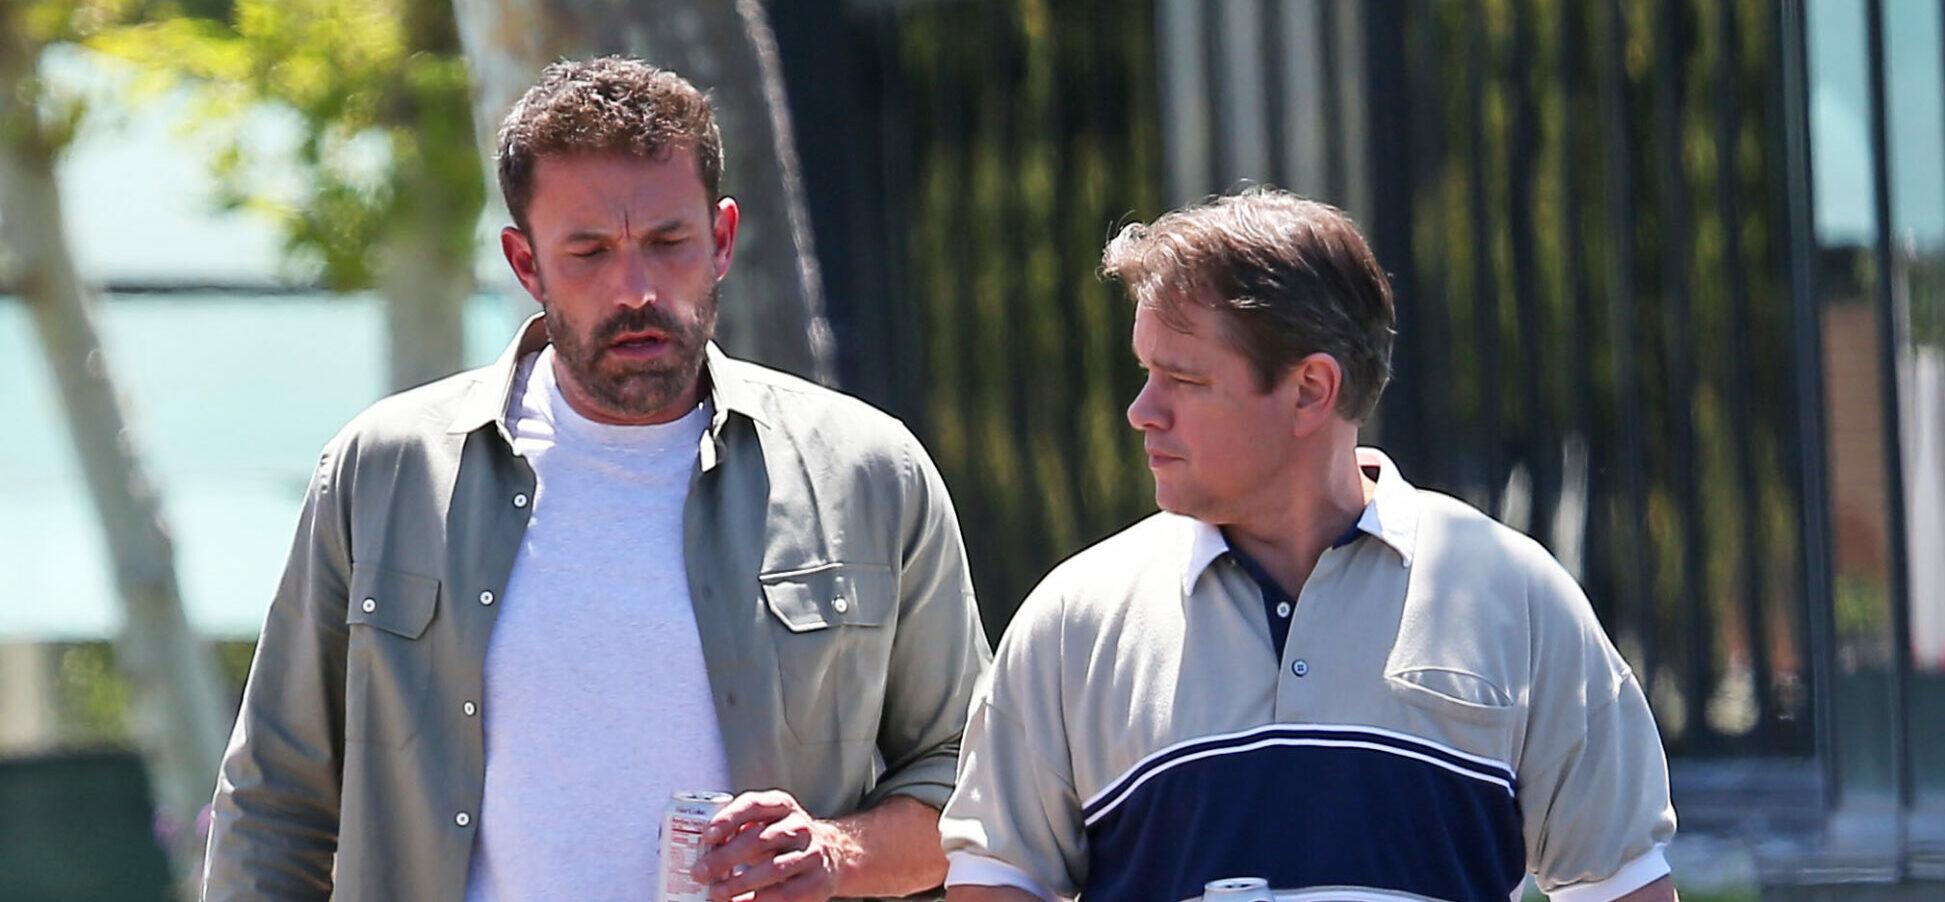 Ben Affleck Recalls Matt Damon’s Inability To Clean Up While They Were Roommates 